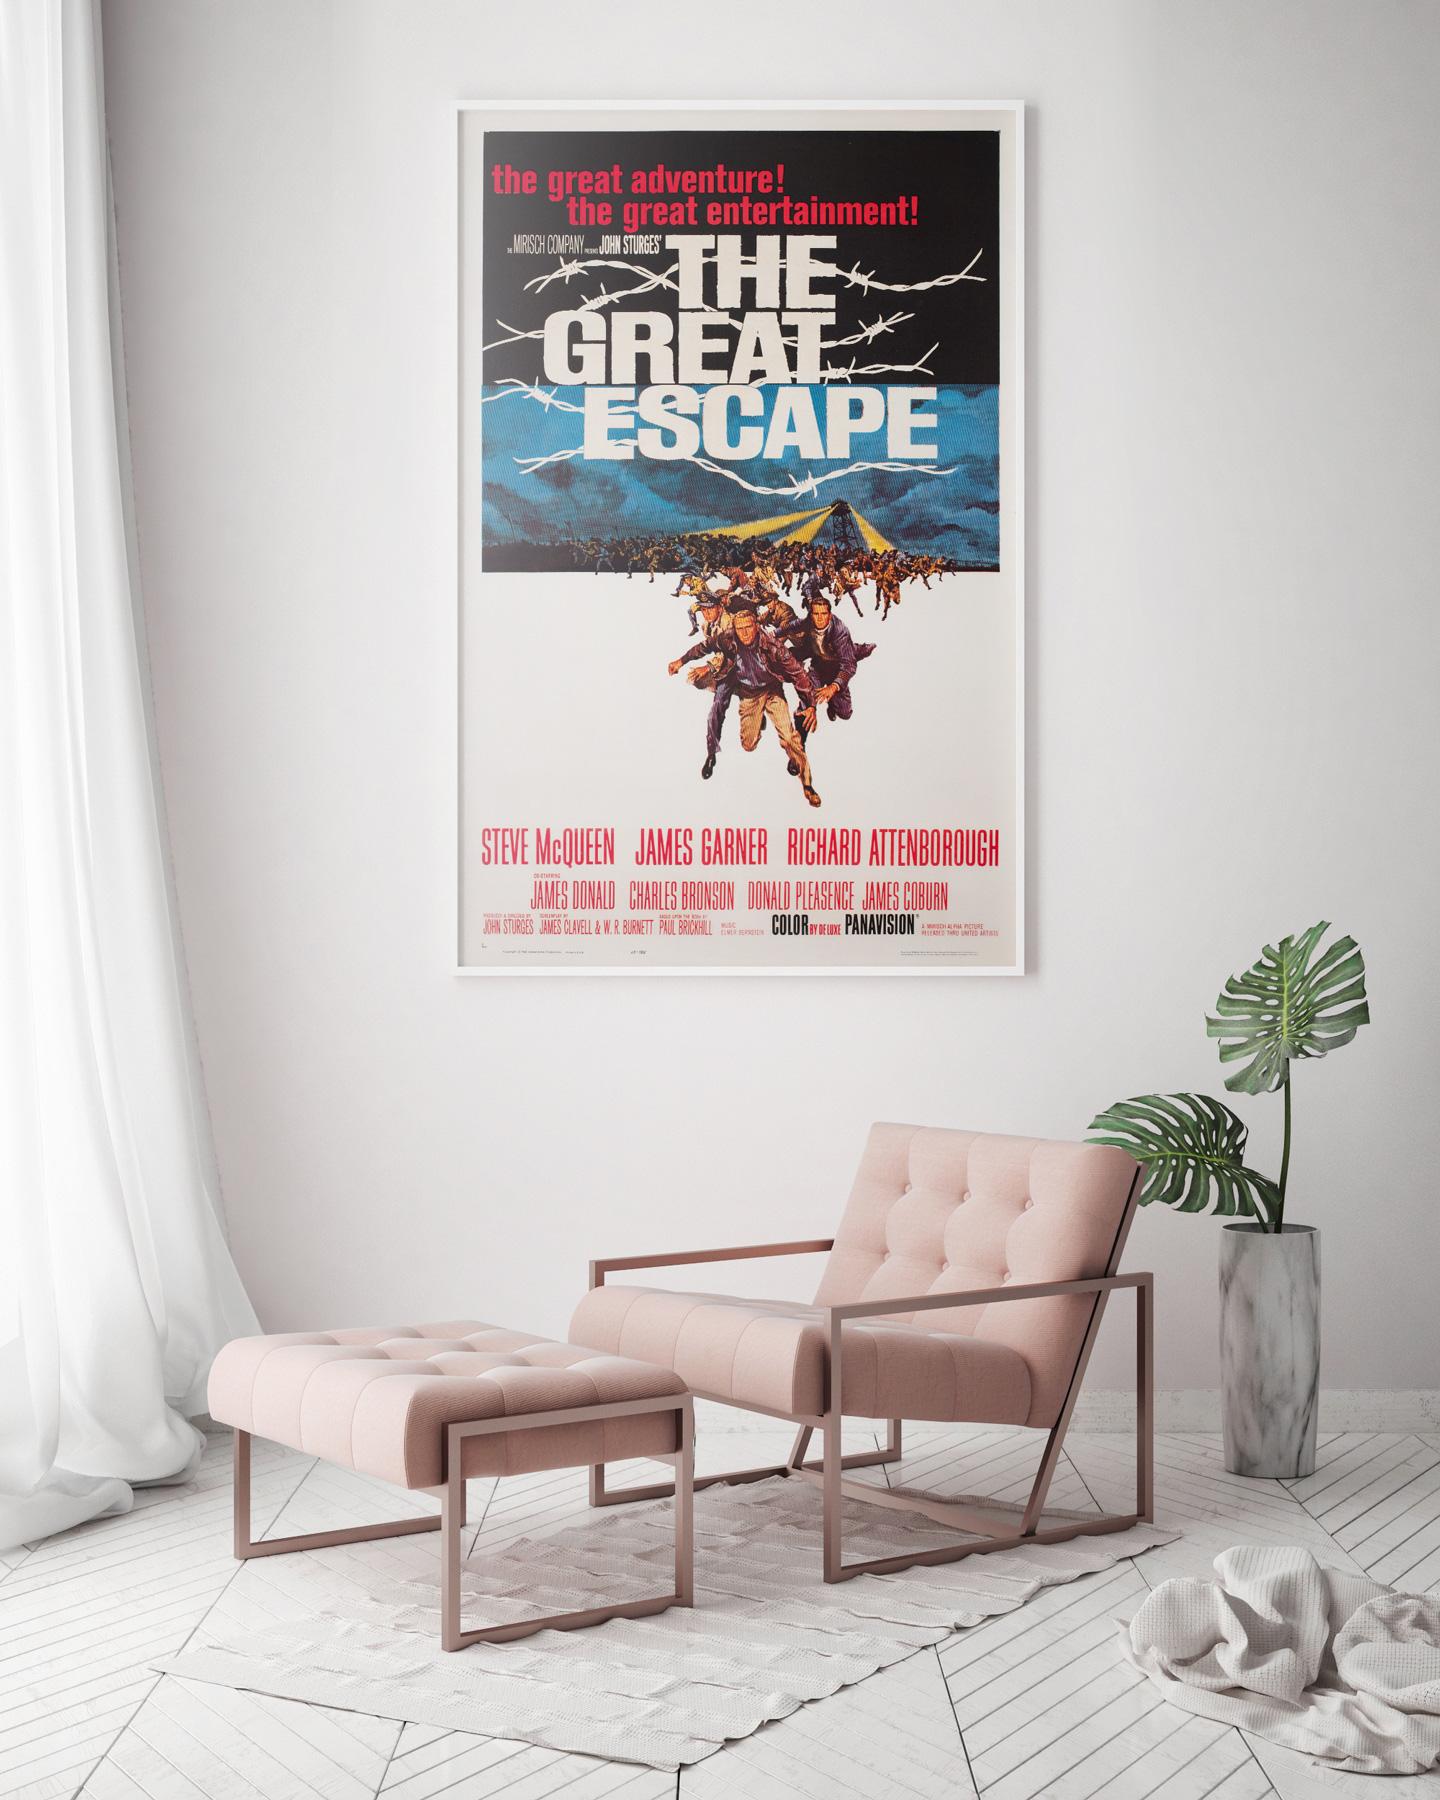 Smashing country-of-origin poster for John Sturges classic The Great Escape starring Steve McQueen, James Garner and Richard Attenborough. Fantastic design by Frank McCarthy.

This vintage movie poster was originally folded (as issued) but has now